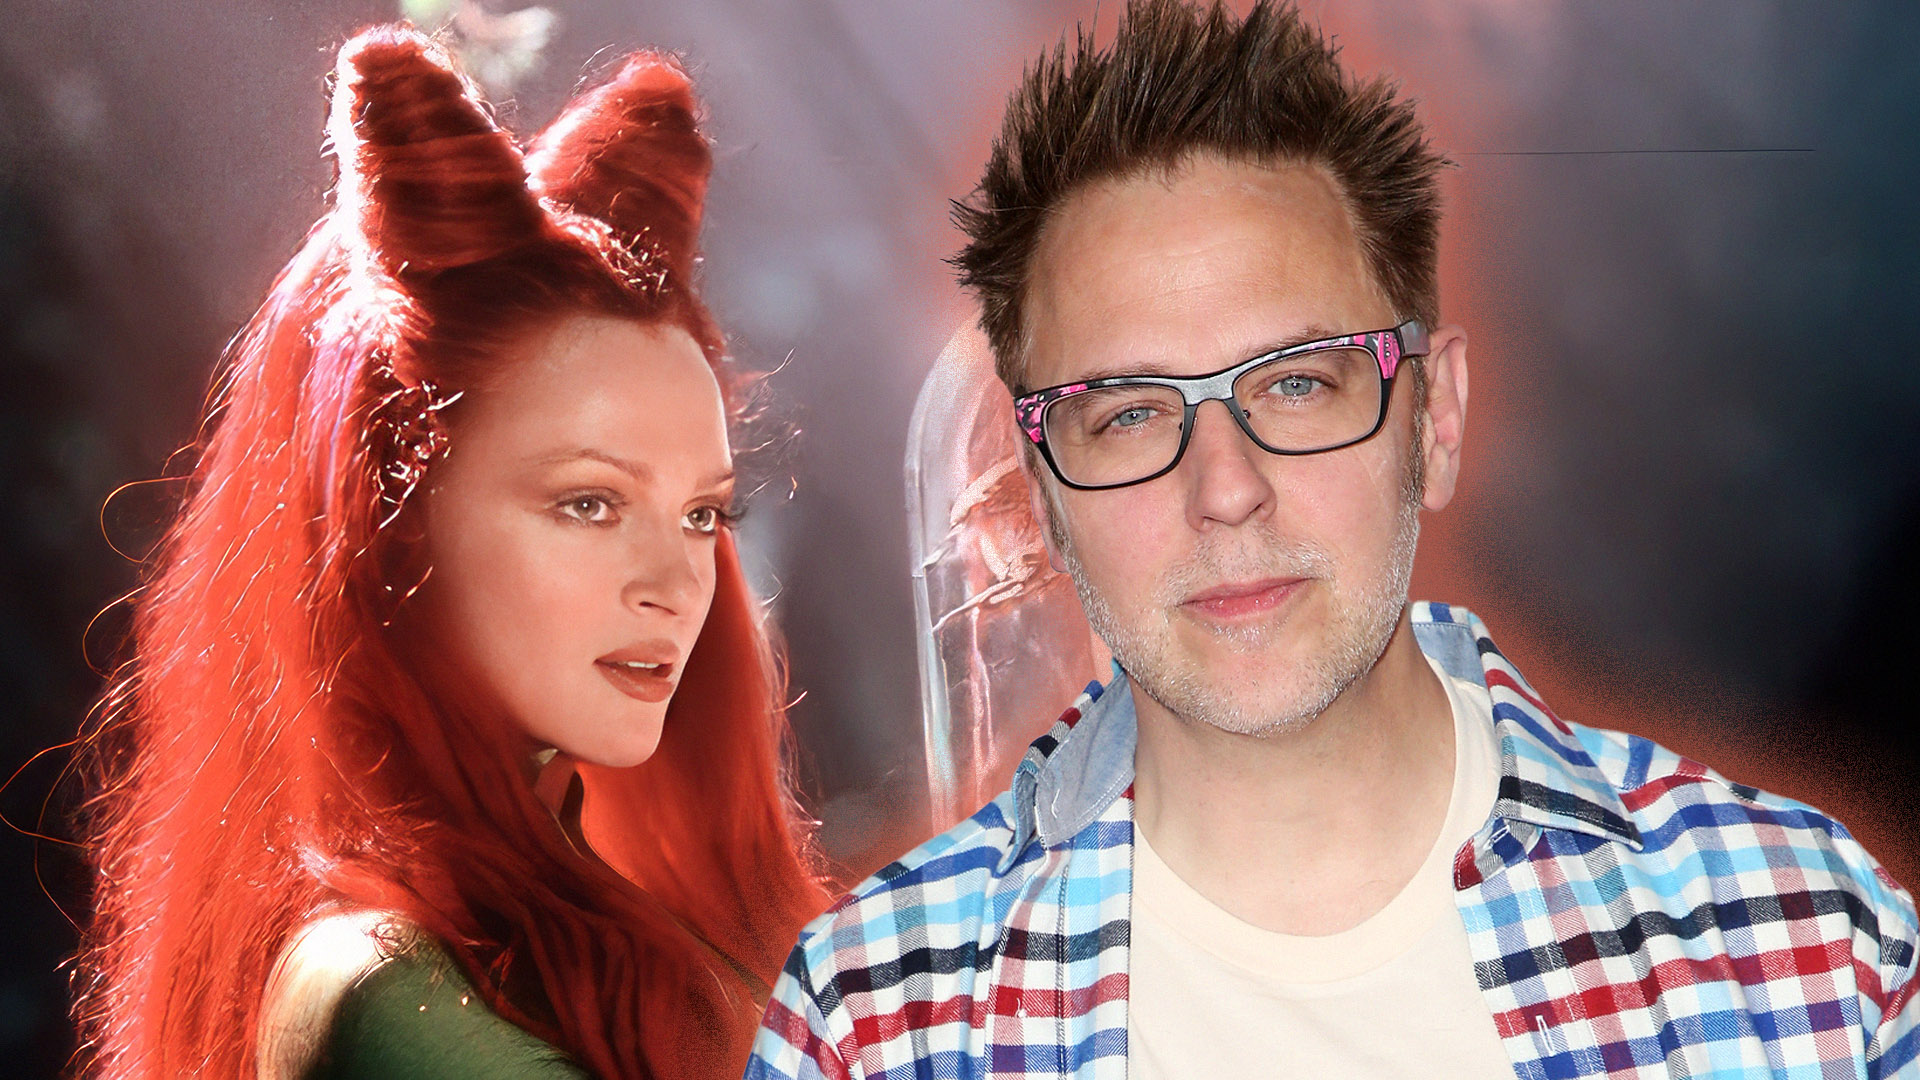 What's Next for James Gunn's DCU? He Already Has a Perfect Poison Ivy Actress to Consider